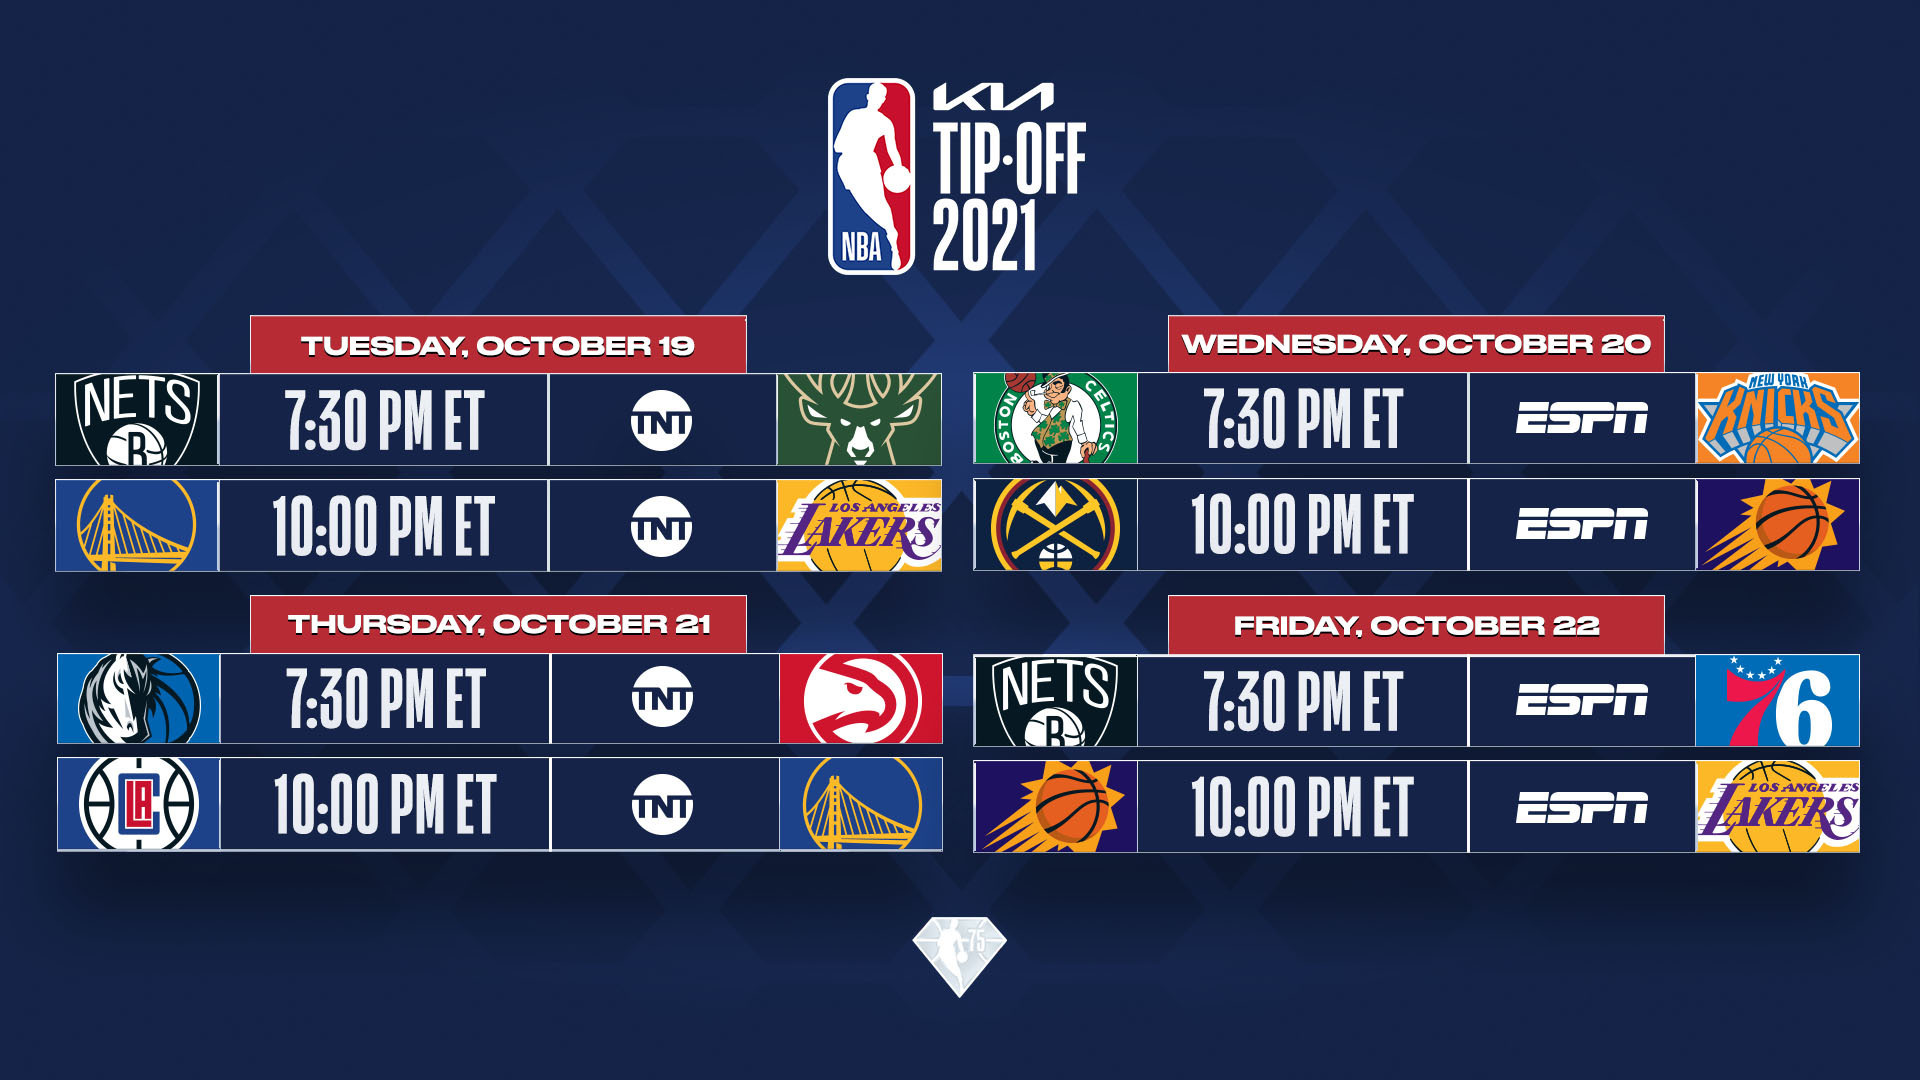 NBA reveals Kia NBA TipOff and Christmas Day schedules